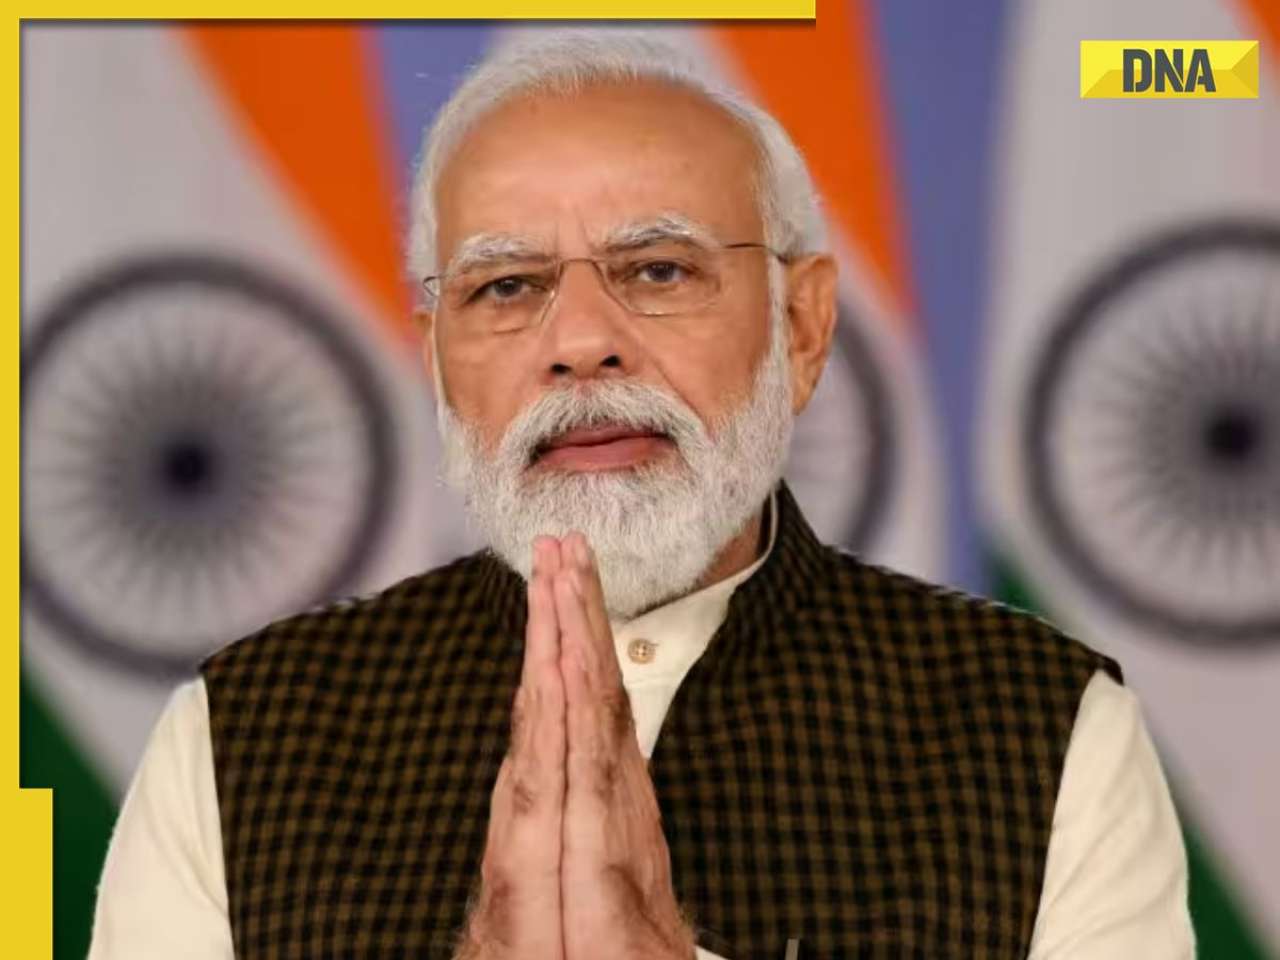 PM Modi to inaugurate Haryana section of Dwarka expressway today